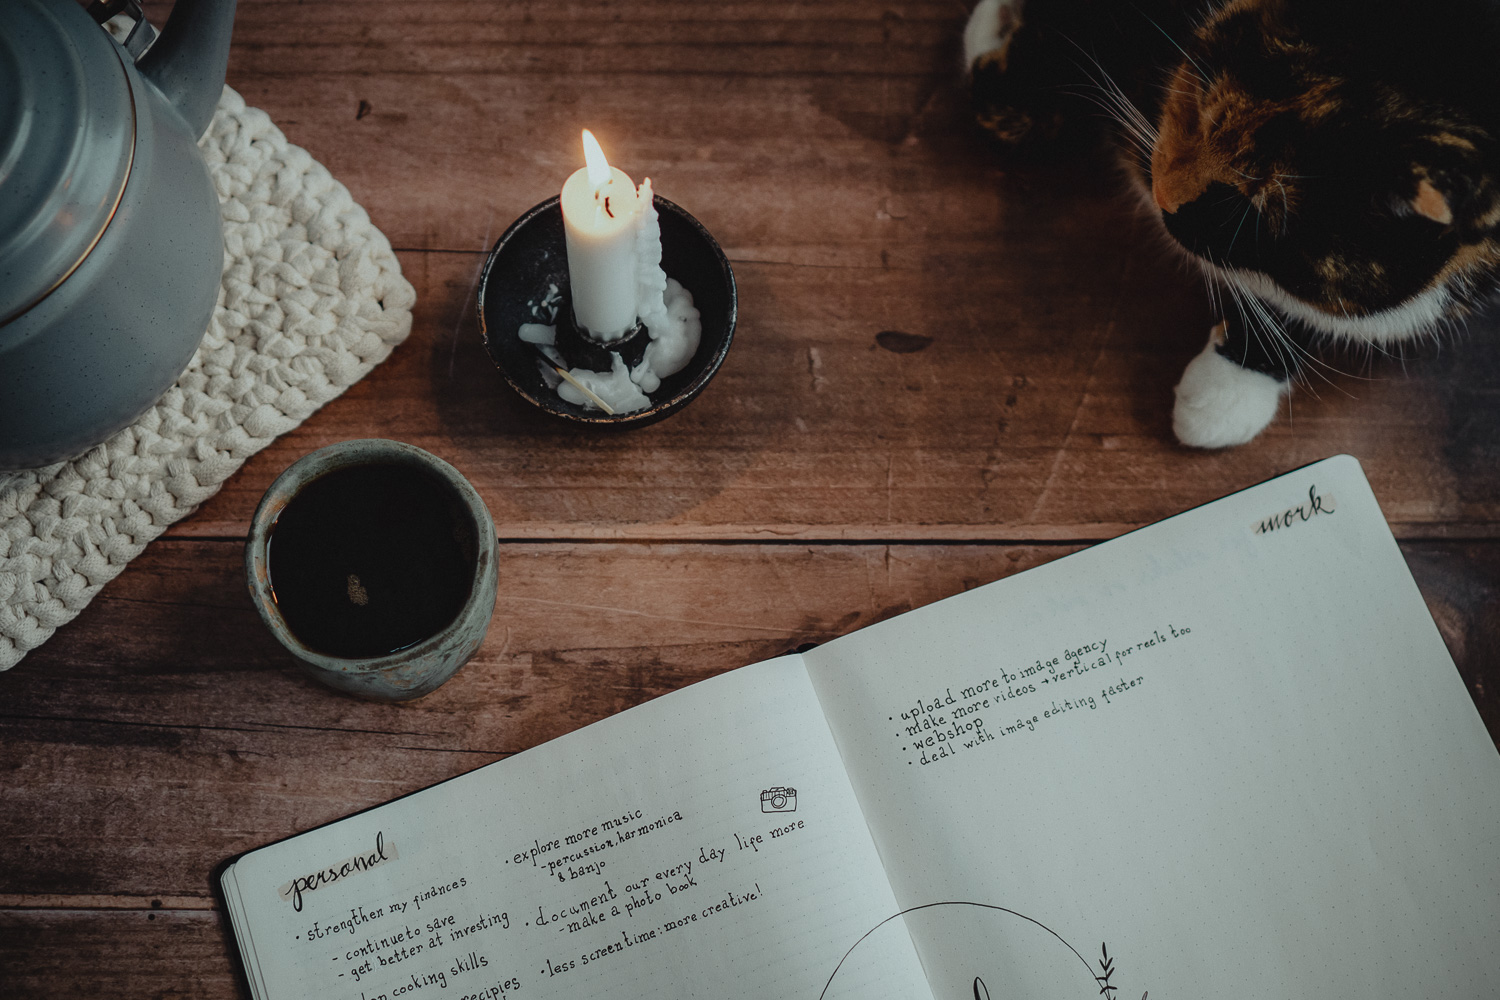 coffee, candle, cat & journal